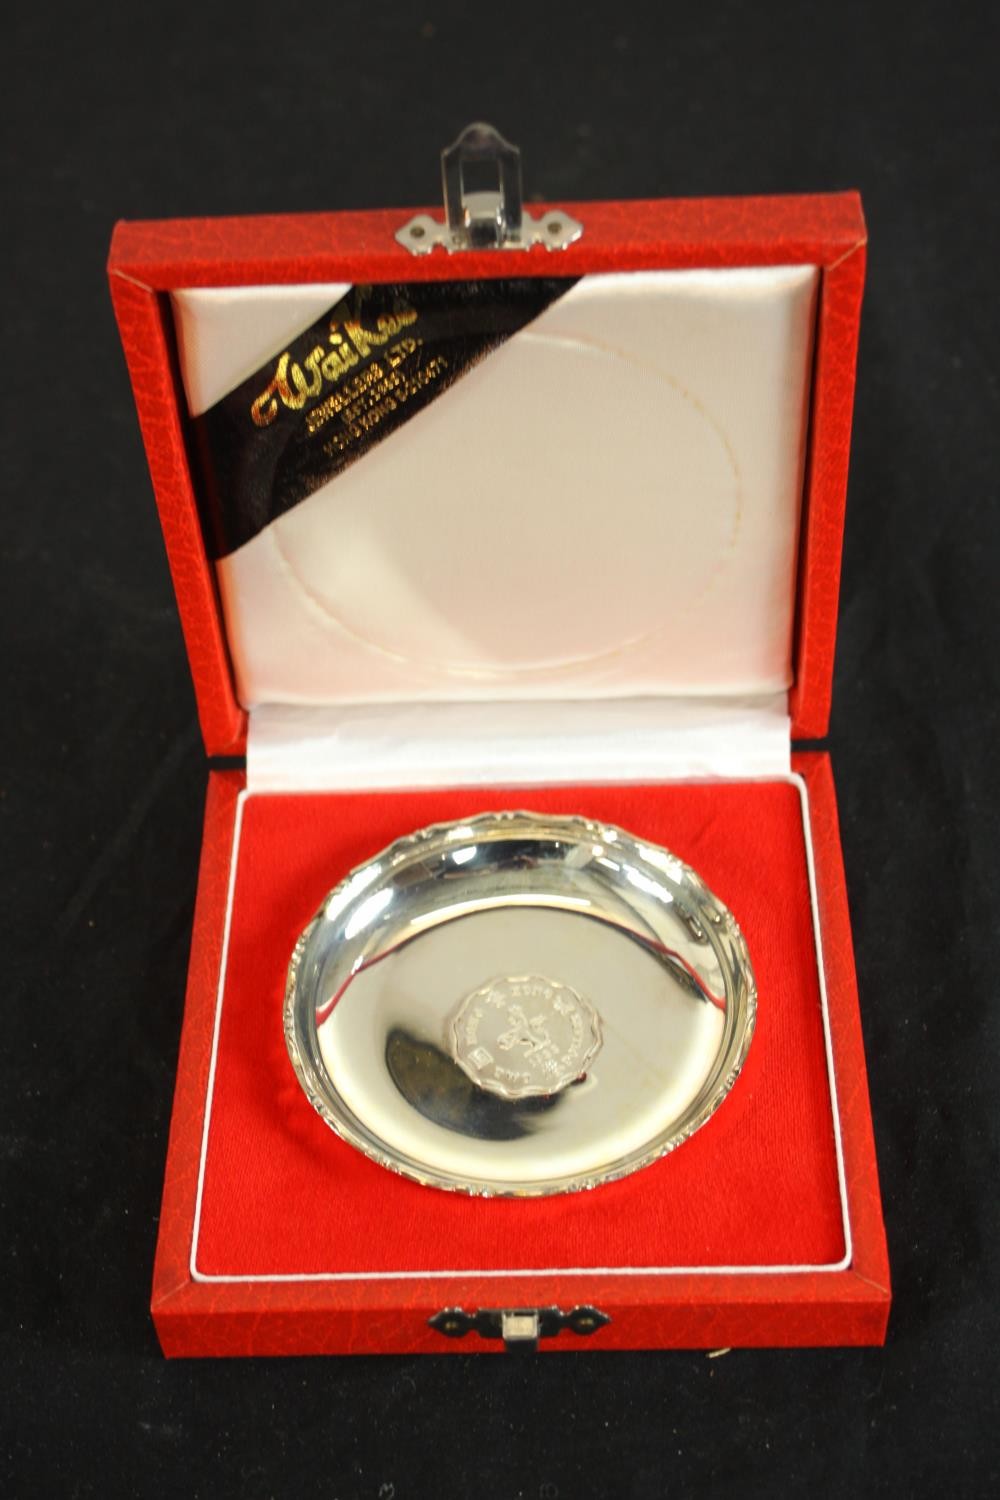 A boxed 20th centuryWai Kee Jewellers Hong Kong silver coin dish, inset with a Elizabeth II coin.